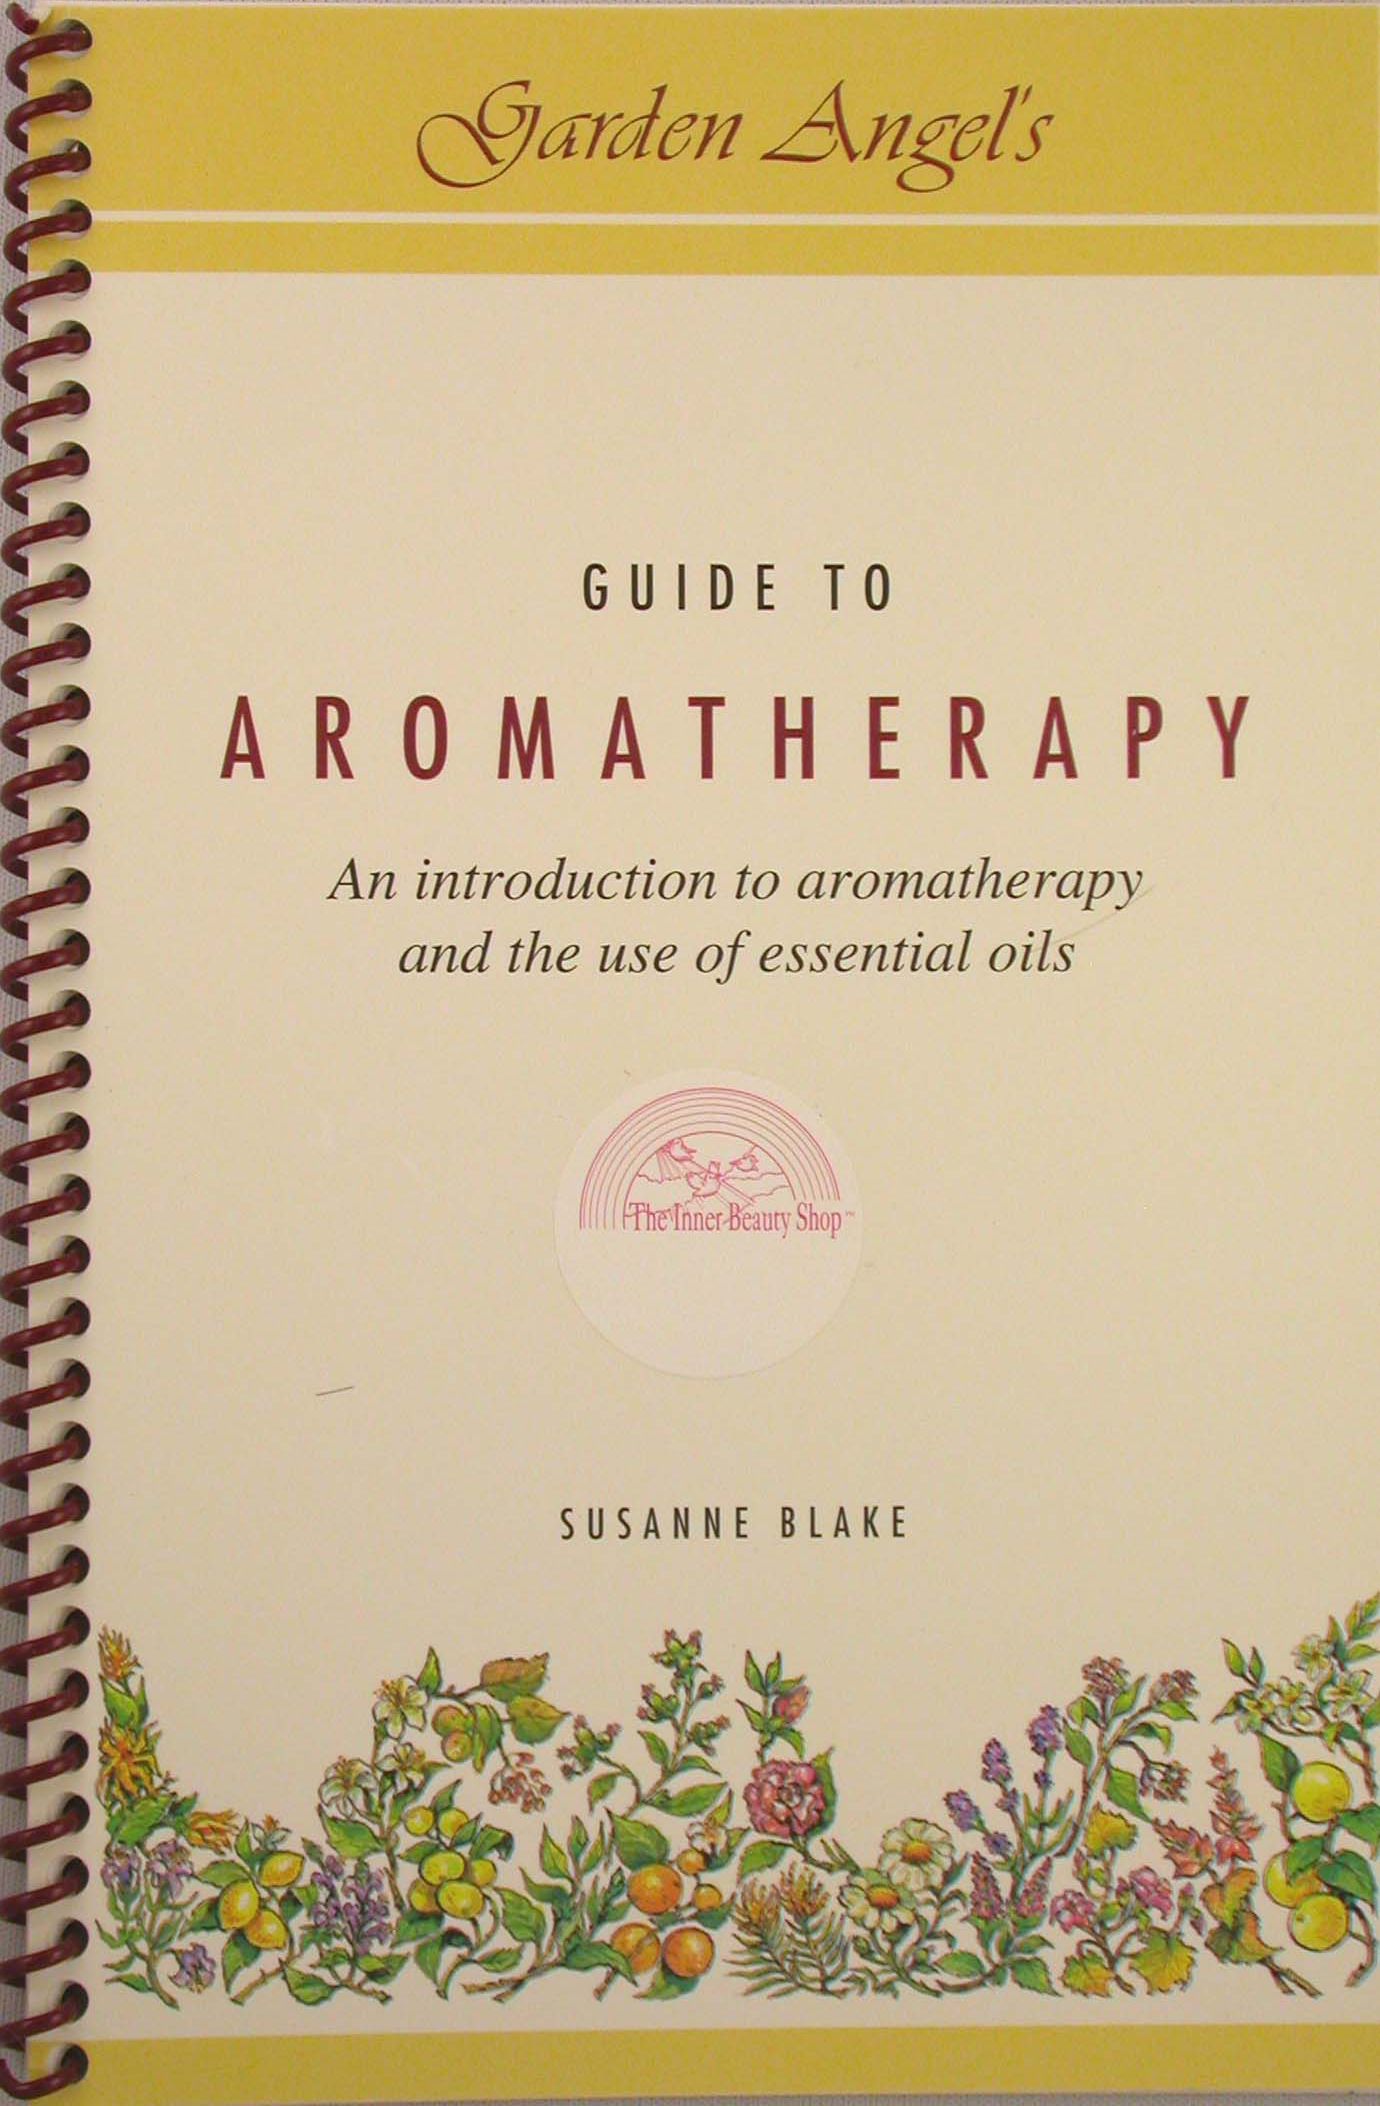 A Guide to Aromatherapy